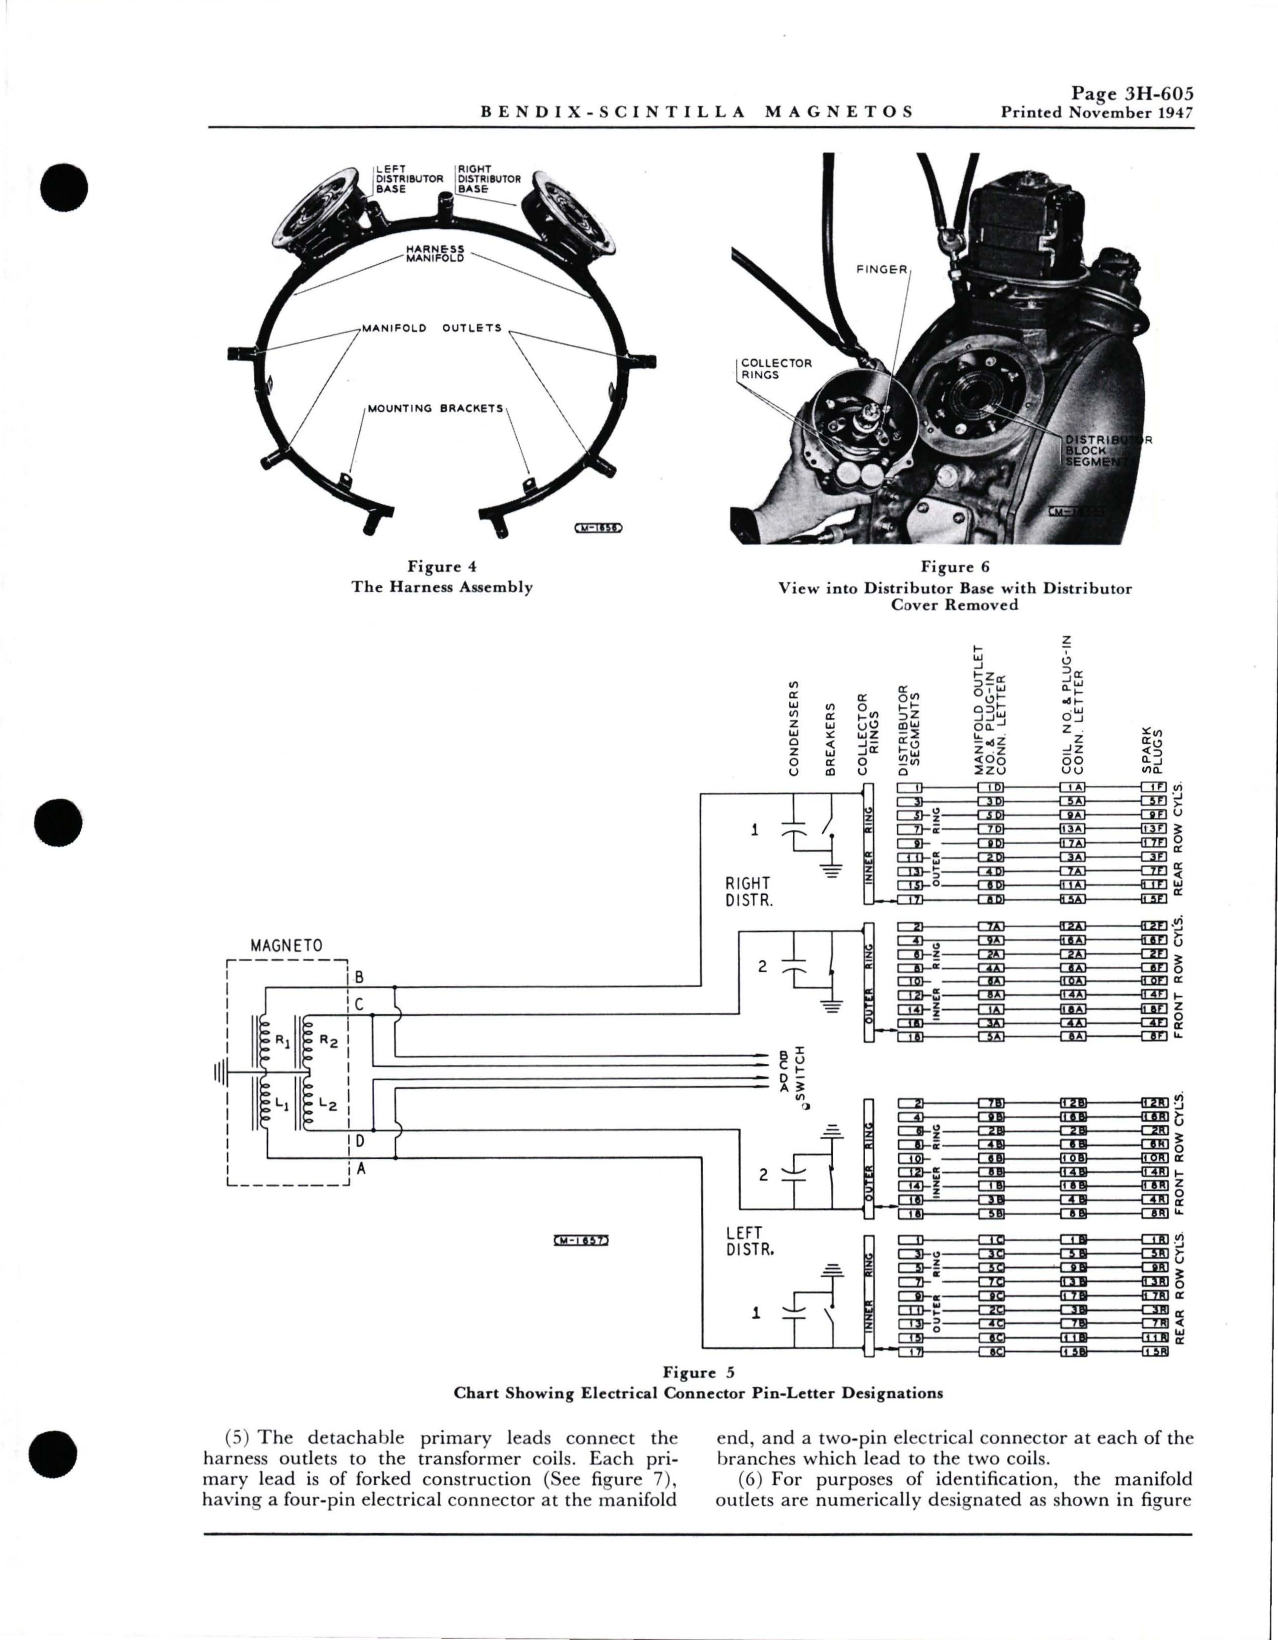 Sample page 5 from AirCorps Library document: Maintenance Manual for Double Wasp R-2800 CB Series - Part 166498